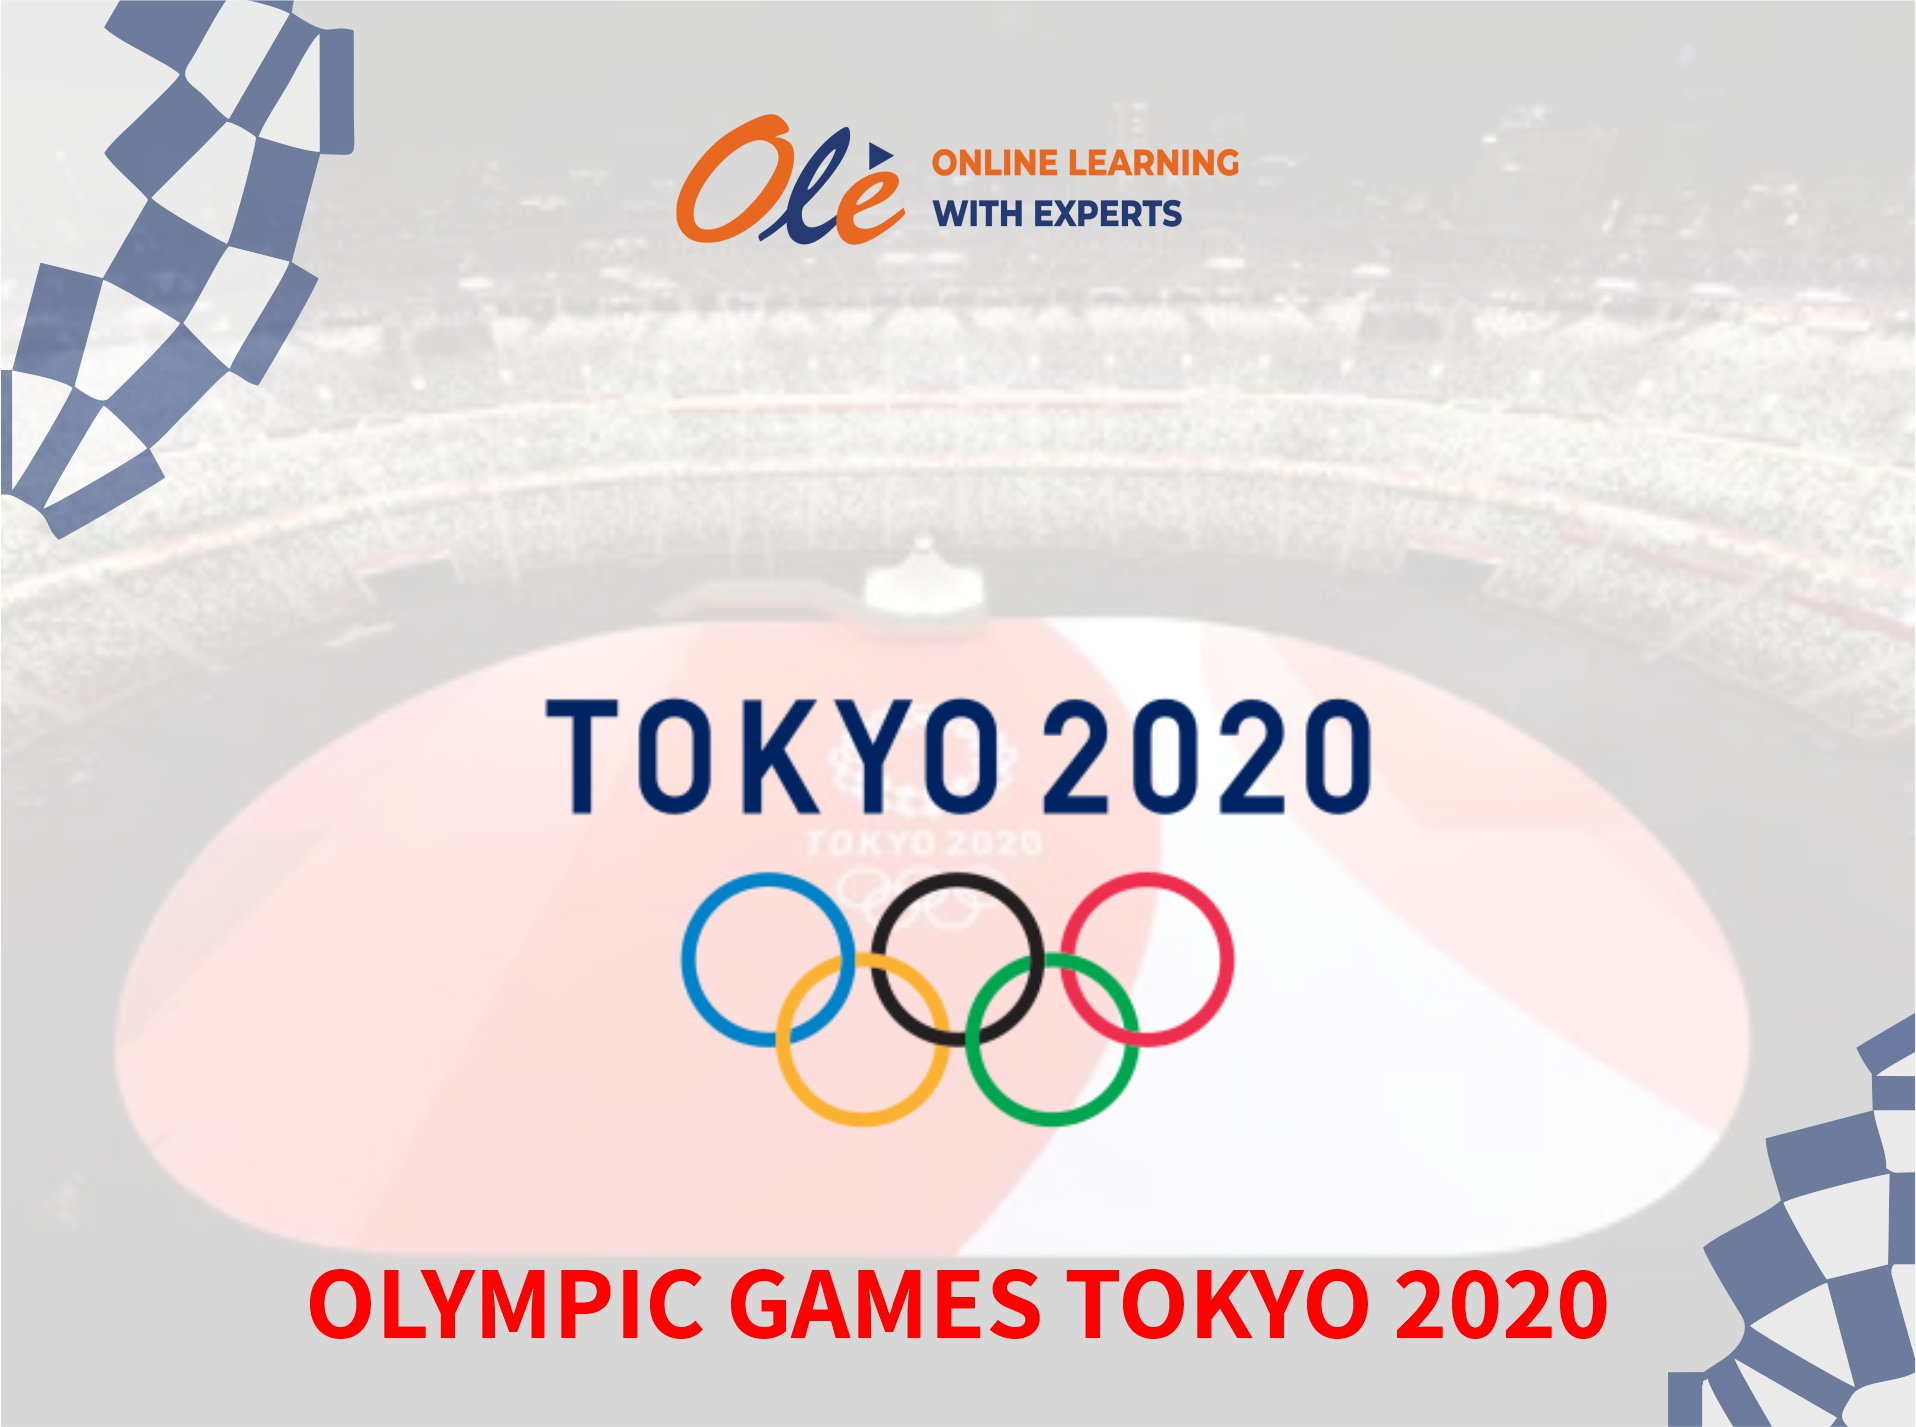 All About Olympic Games Tokyo 2020